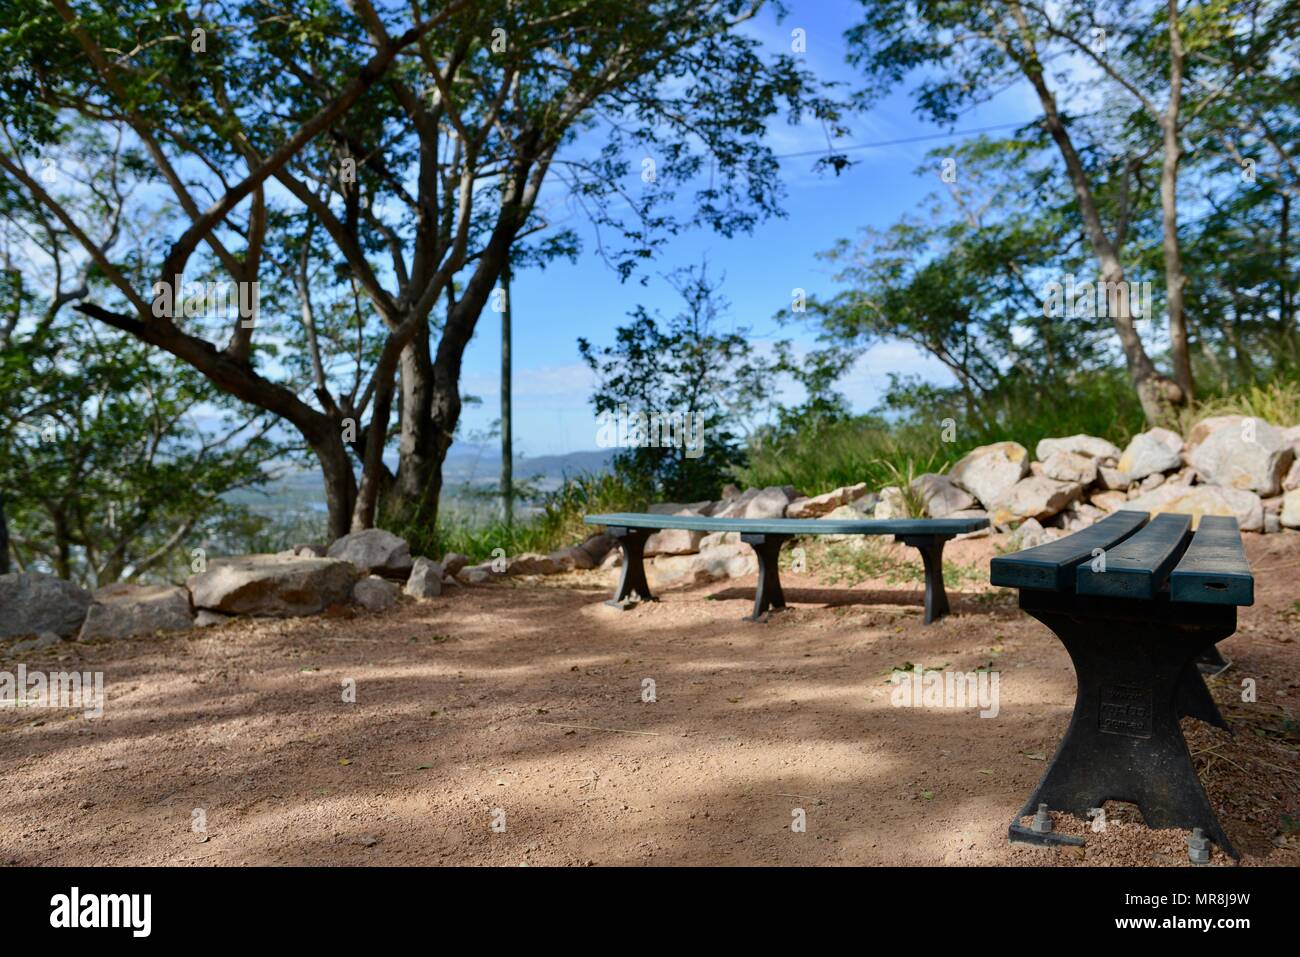 Green plastic molded benches on the cudtheringa track, Castle Hill QLD 4810, Australia Stock Photo